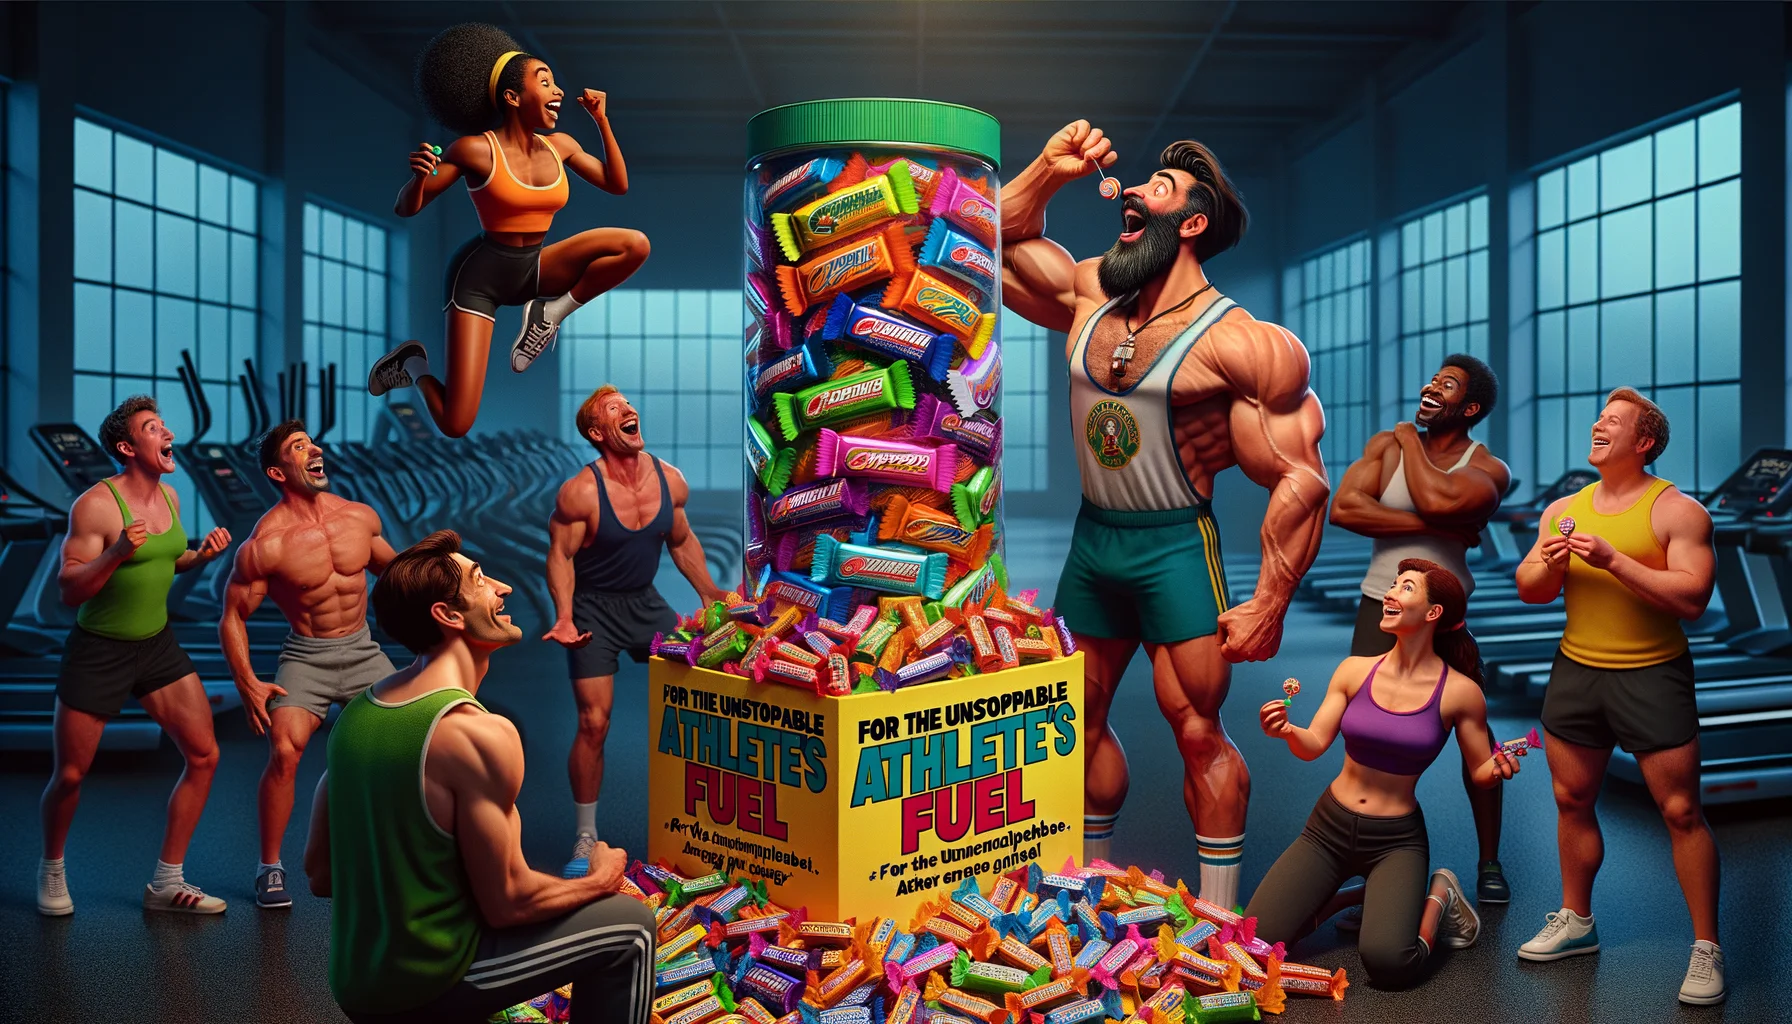 Imagine a lively, humorous scene taking place in a bustling gym. The central focus is a towering display of neon-colored and vibrant energy-enhancing candies, adorned with phrases like 'for the unstoppable athlete' and 'champion's fuel'. The onlookers, an eclectic mix of gender and descent, exhibit a range of reactions - from astonishment to amusement. A male Caucasian bodybuilder is examining the candy label with his muscles flexed and a surprised look, while a female Black sprinter is laughing, candy in hand. A South Asian yoga instructor is juggling a handful of candies with a grin, and a Middle-Eastern weightlifter is trying one with an expression of sheer joy.